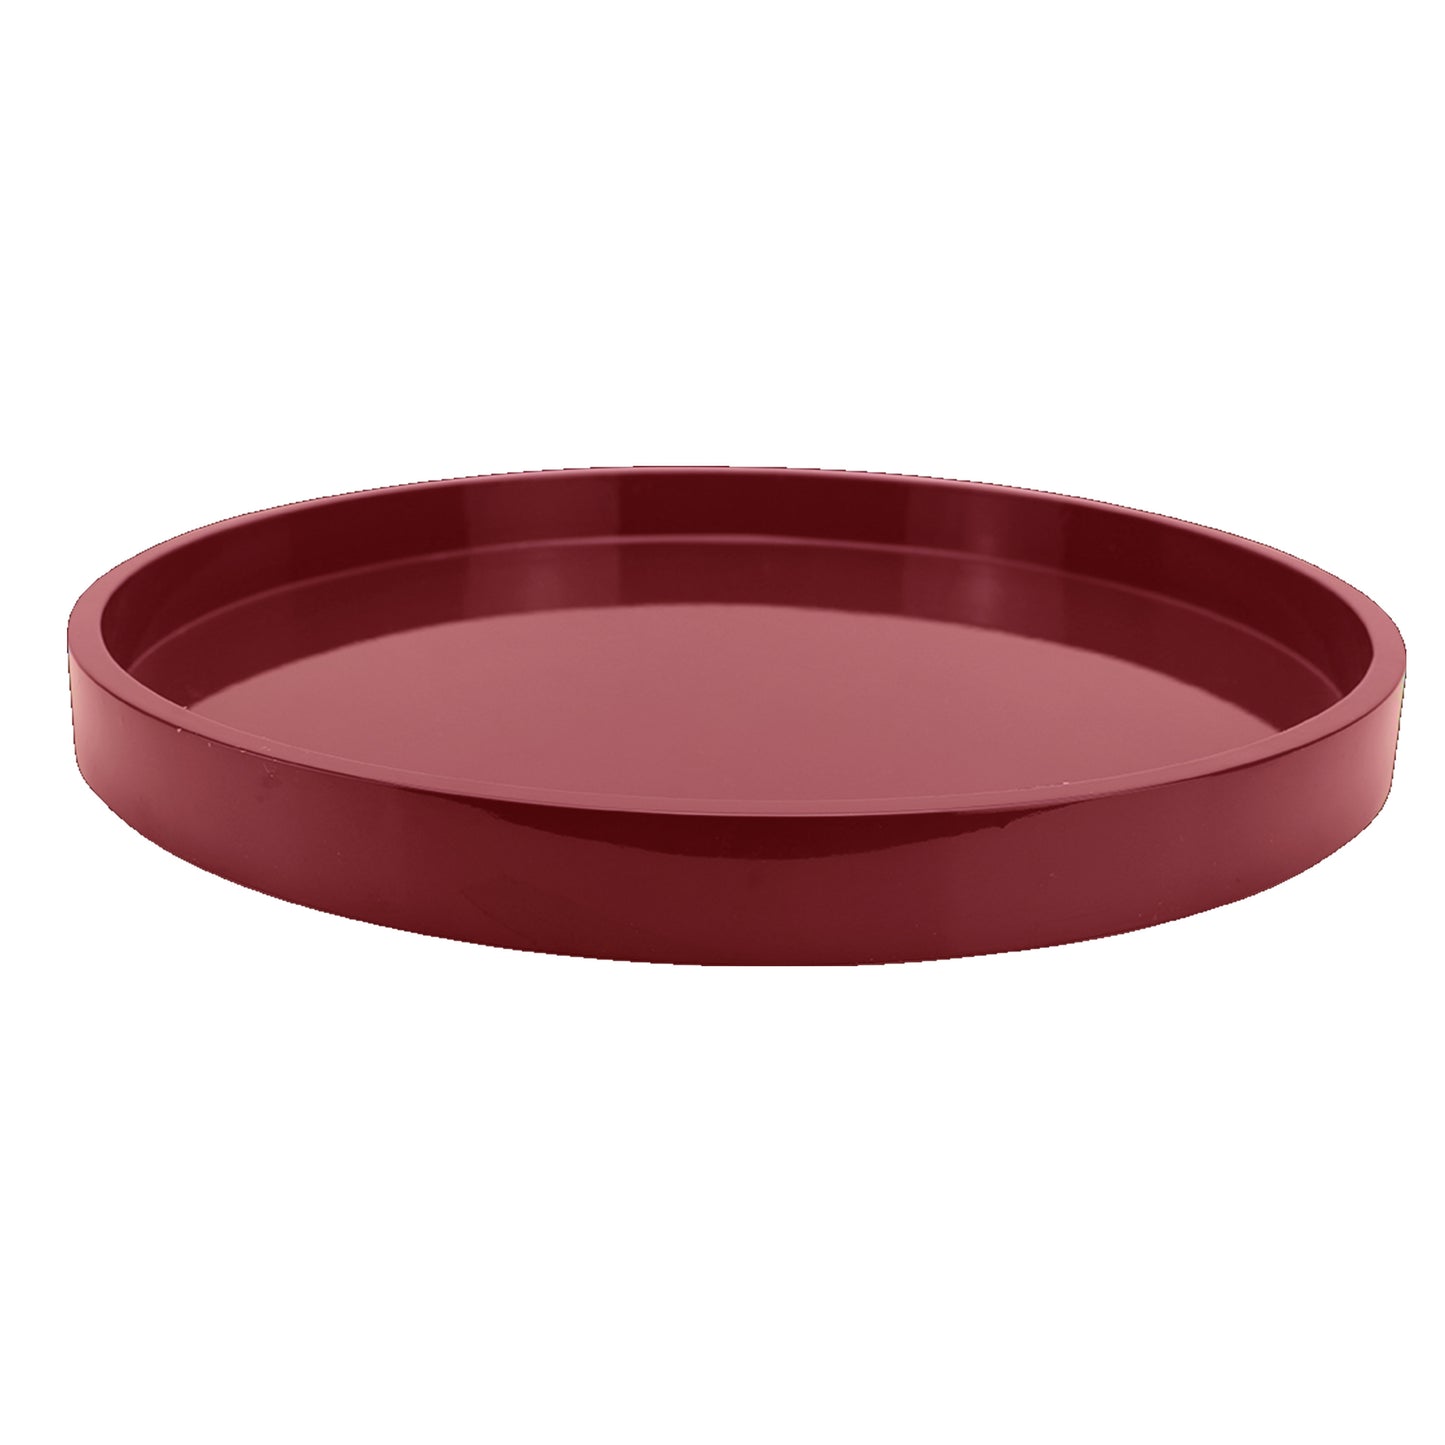 Cherry Straight Sided Round Medium Lacquered Tray